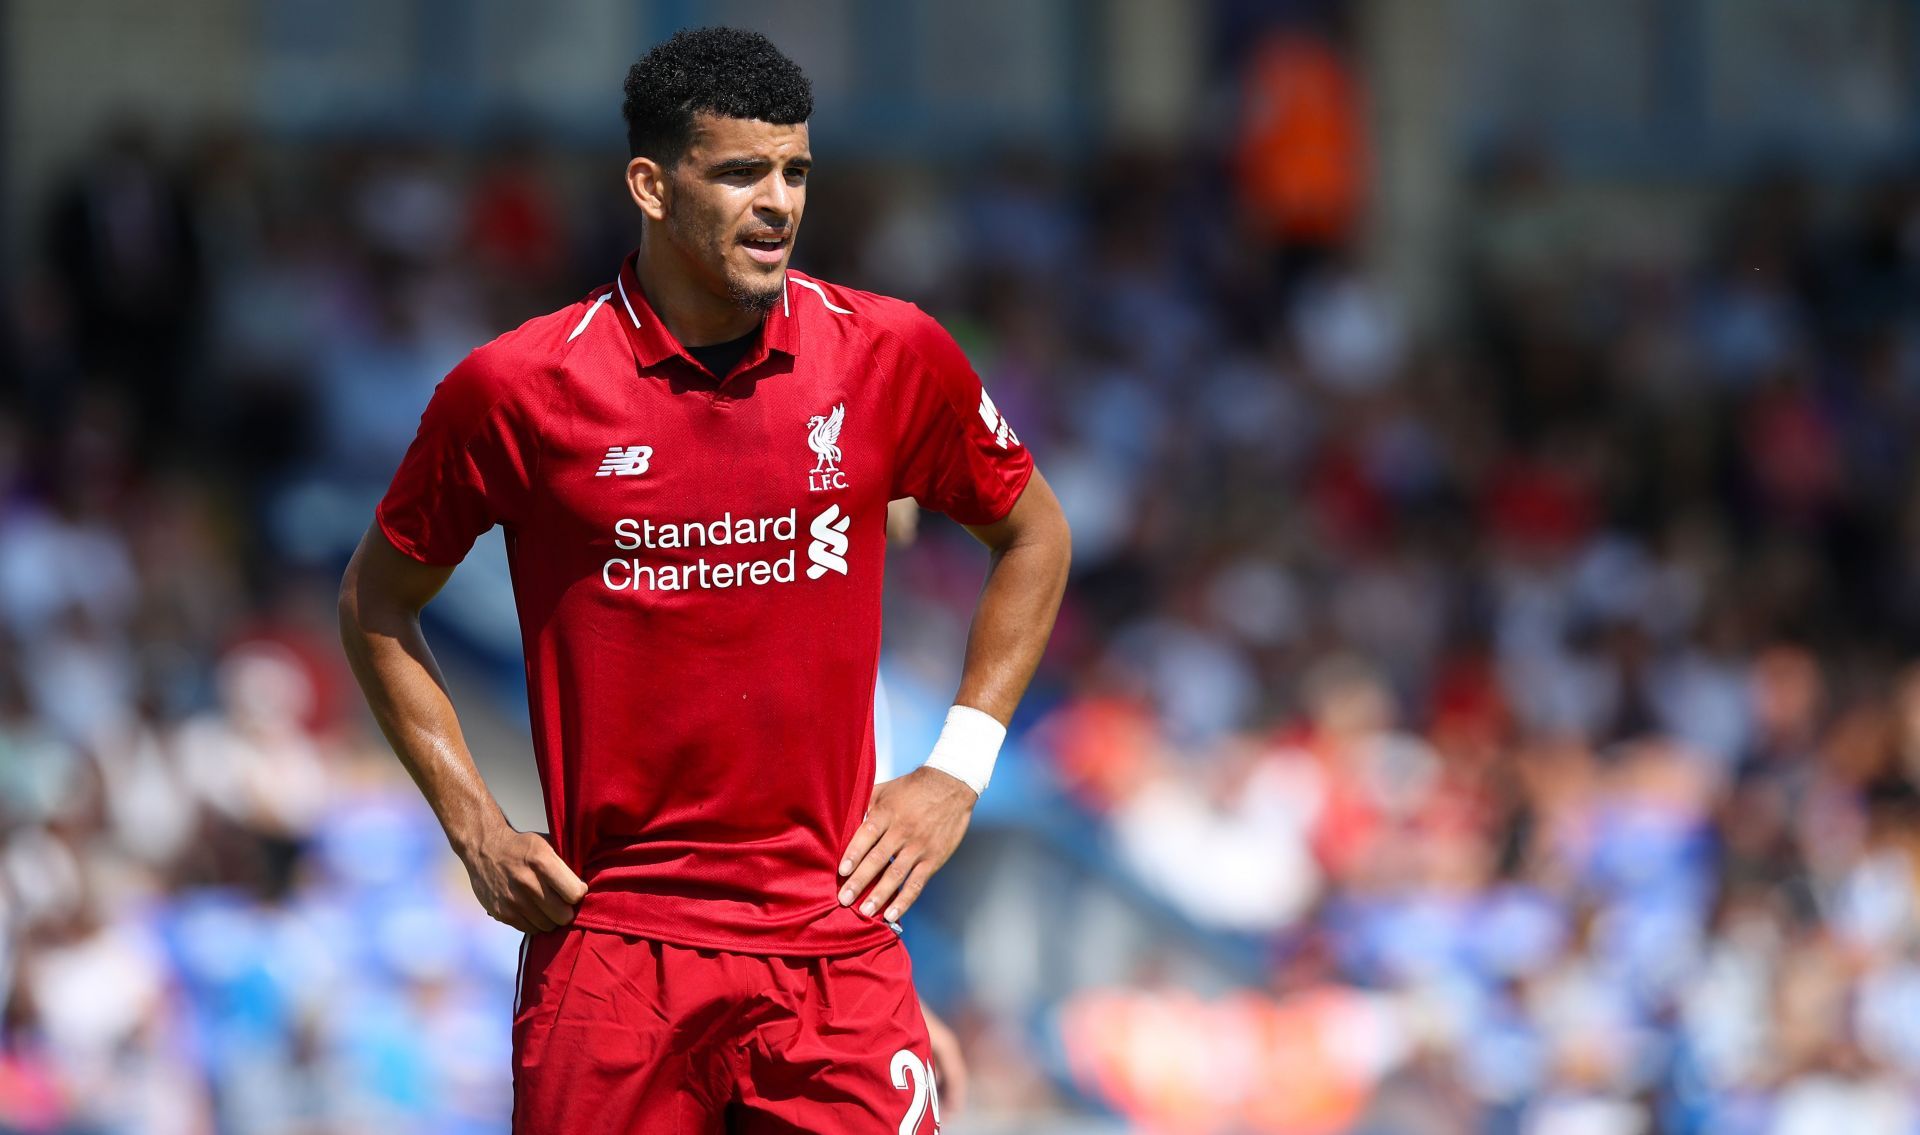 Dominic Solanke failed to live up to his hype at Liverpool